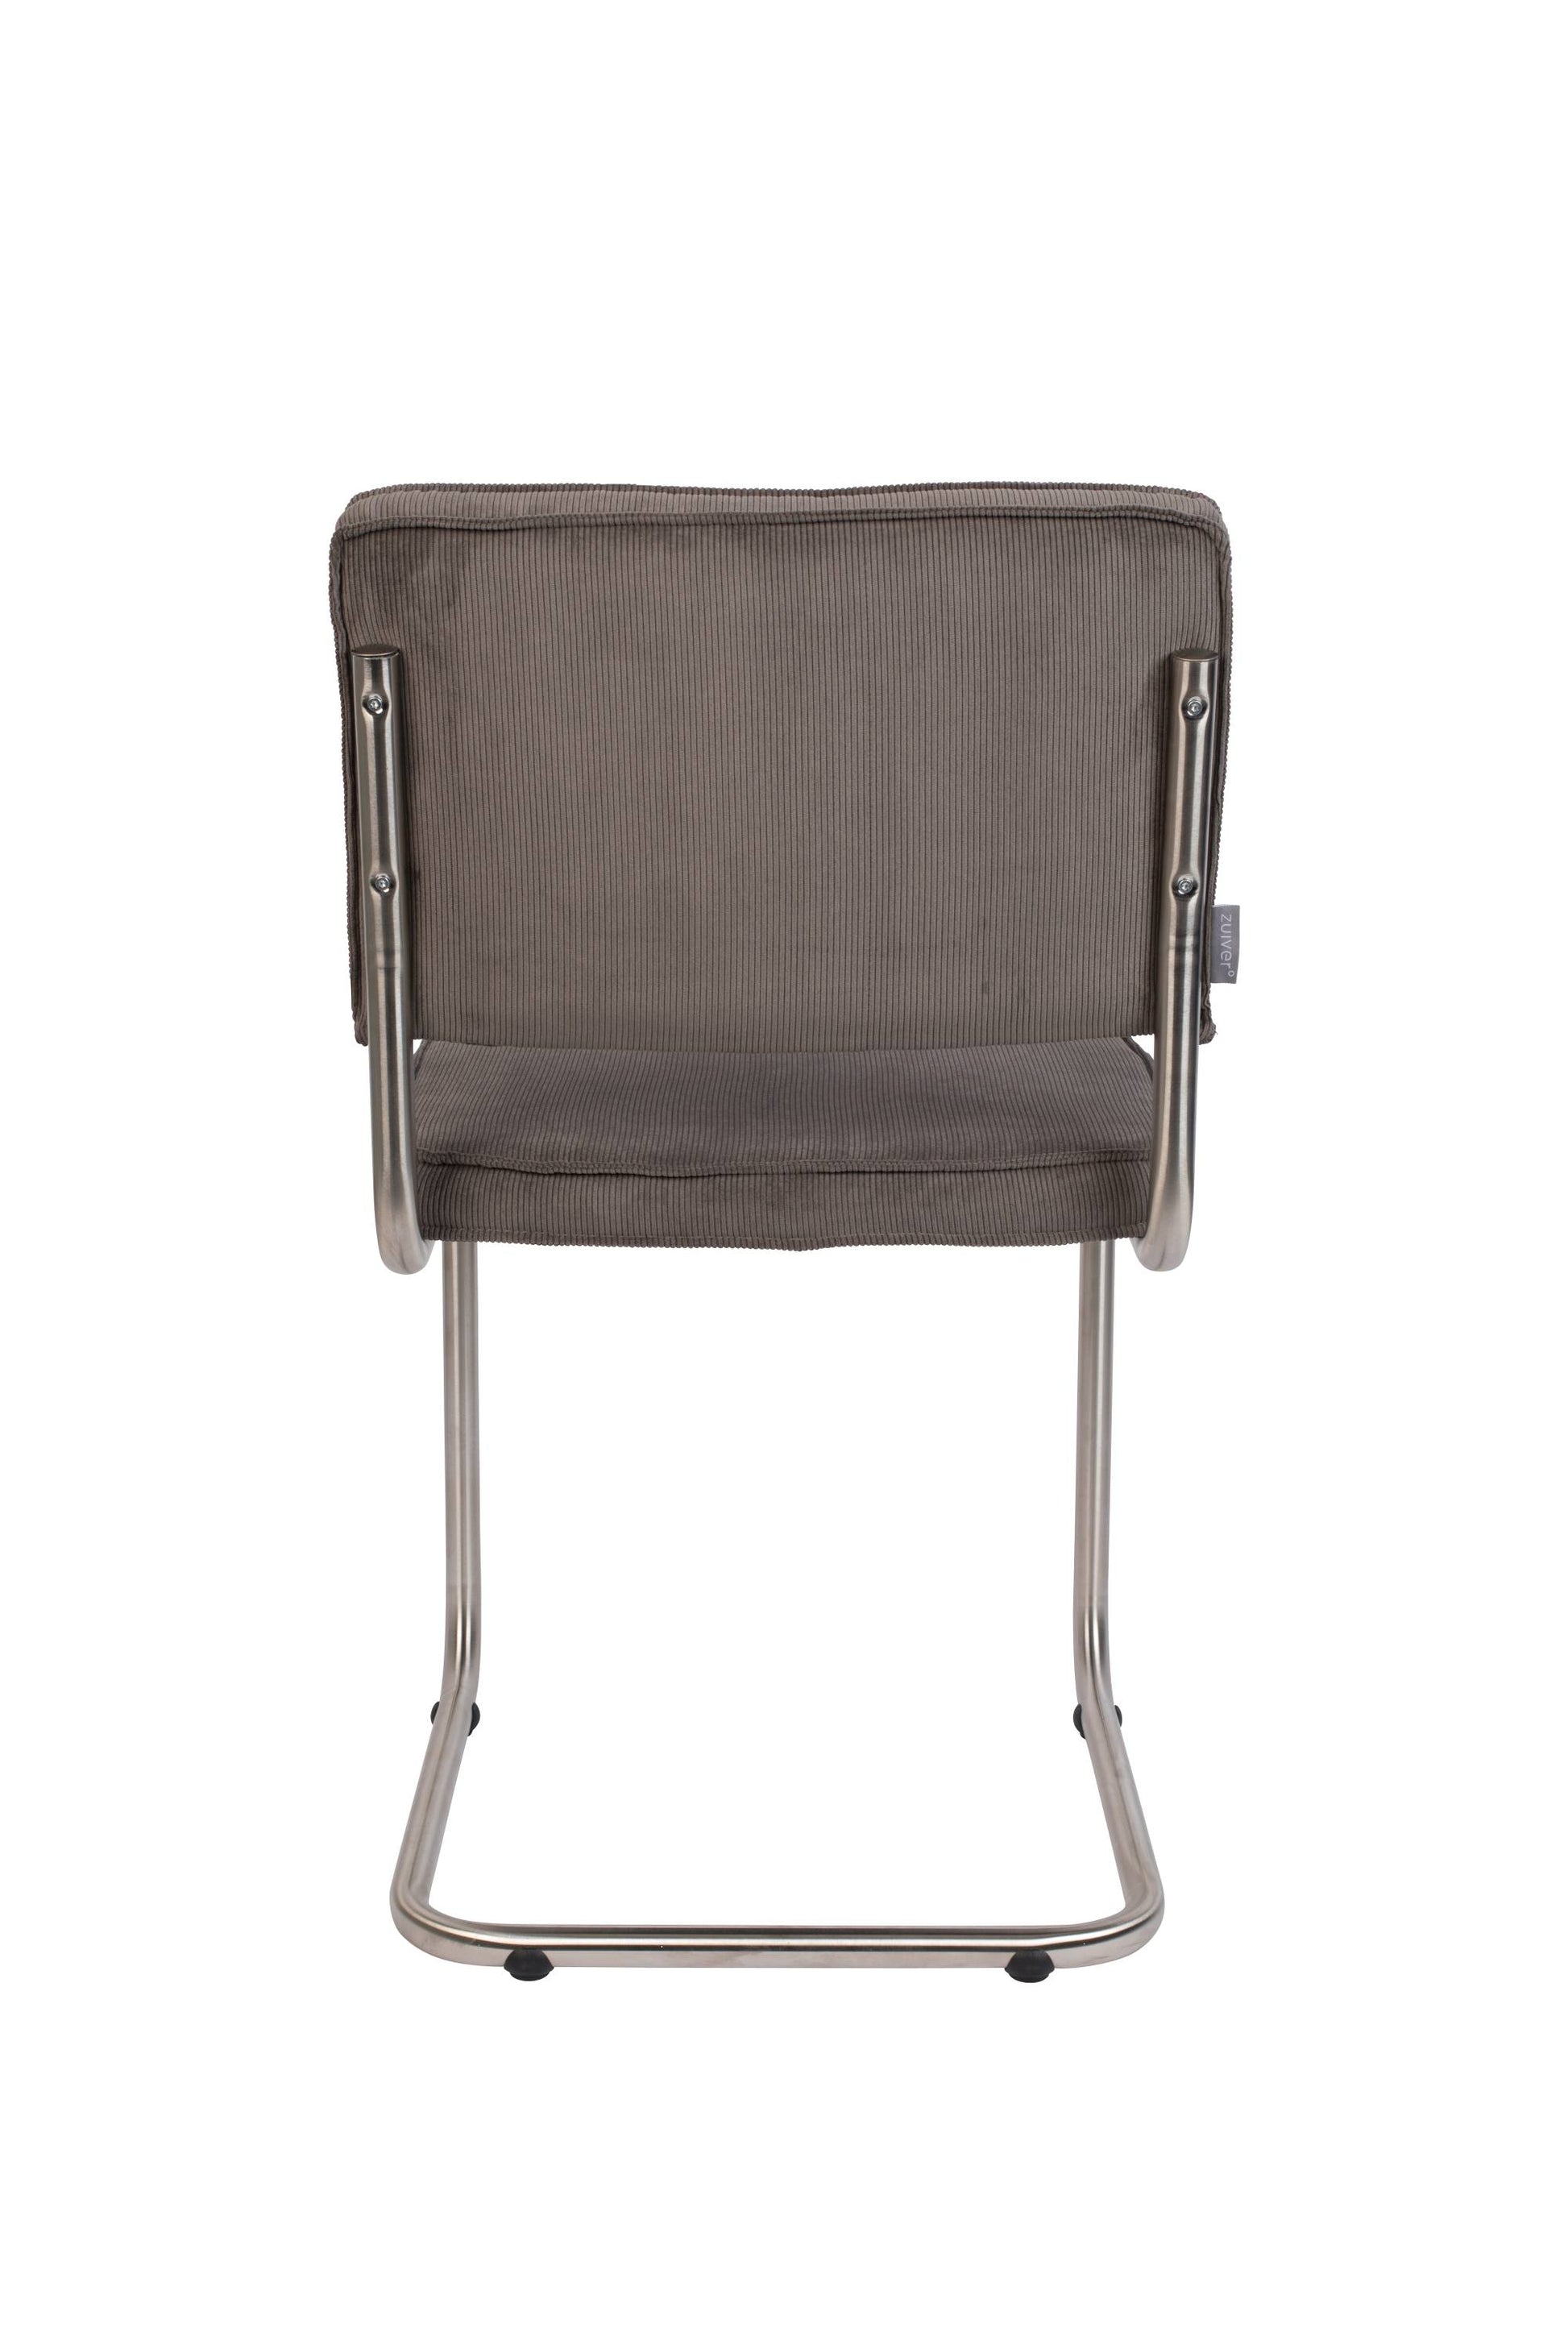 Zuiver | CHAIR RIDGE BRUSHED RIB GREY 6A Default Title